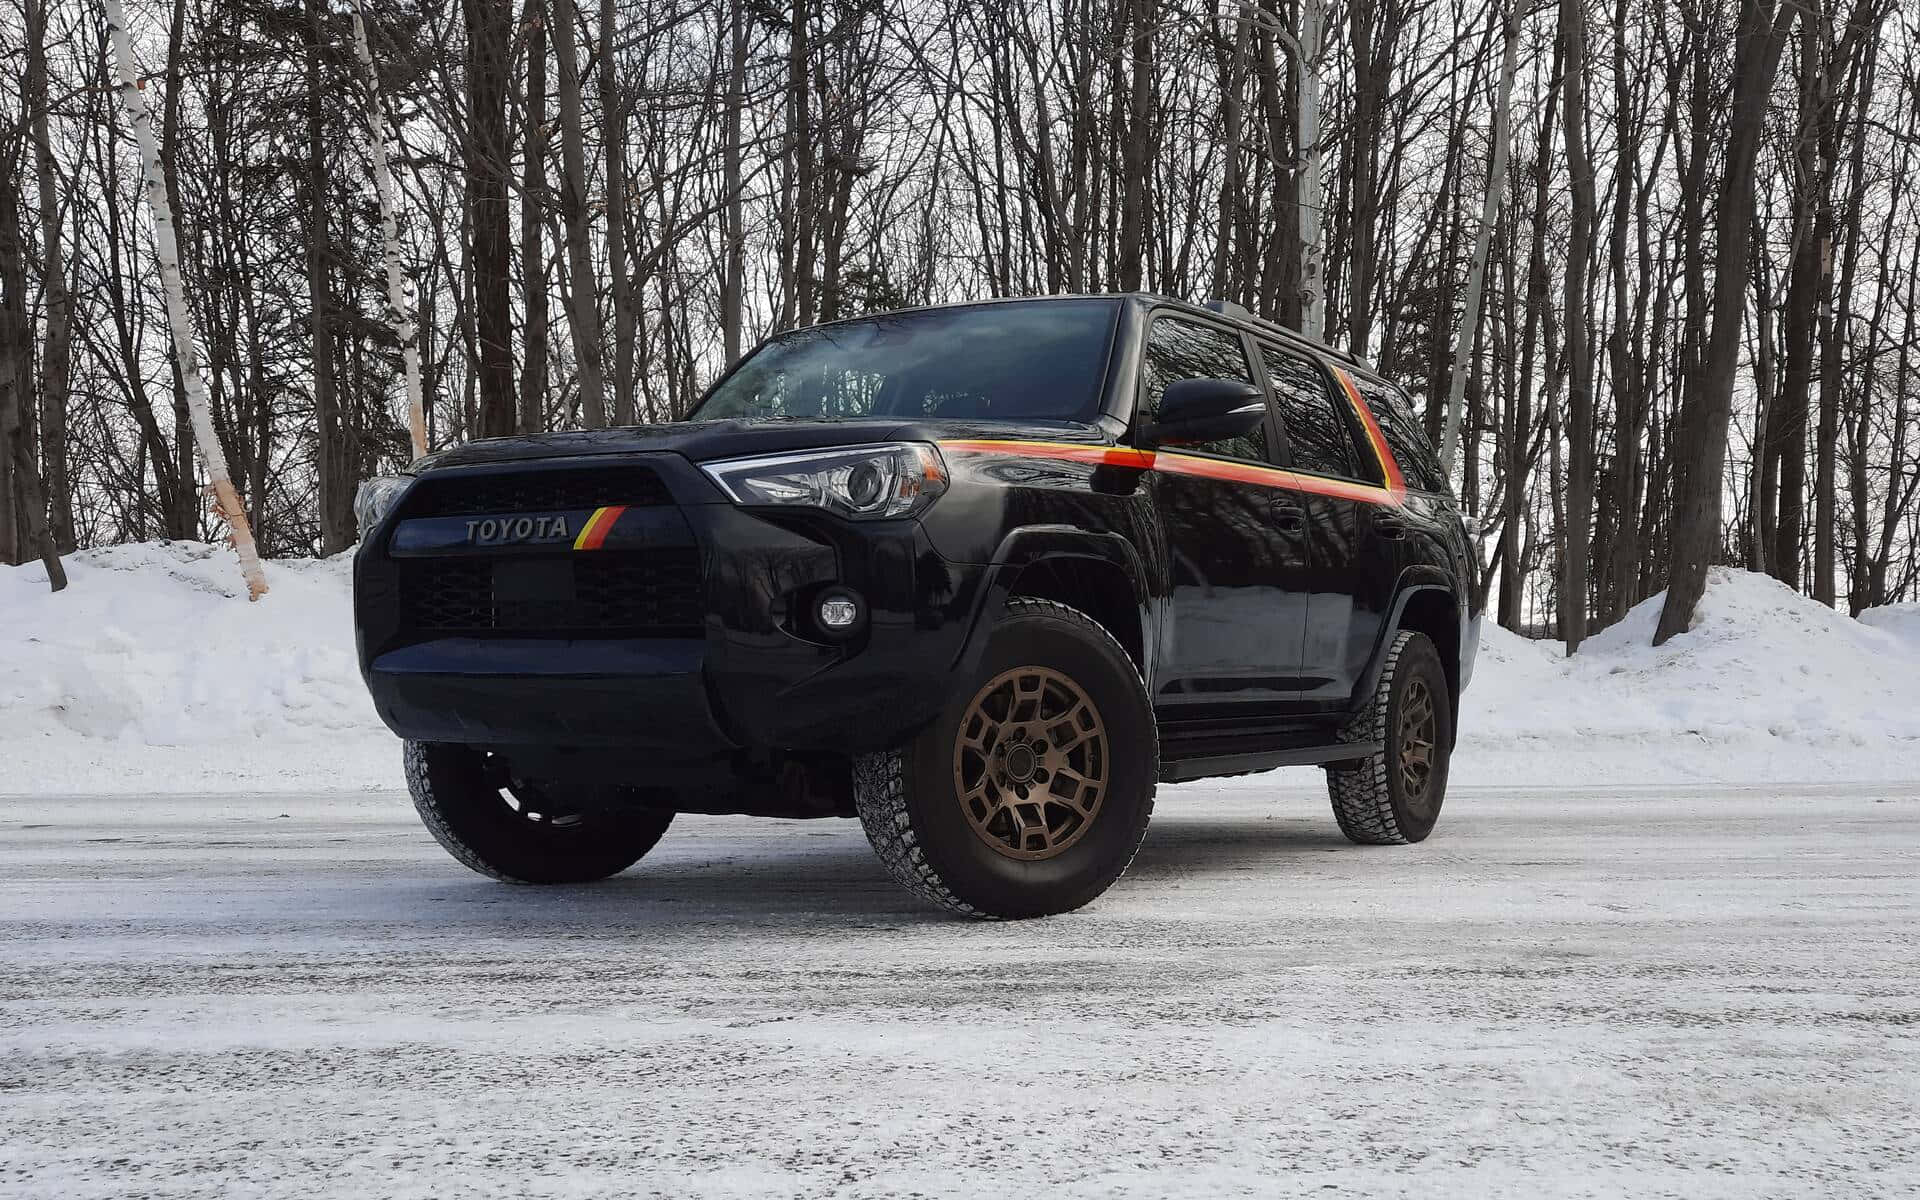 A Black Toyota 4runner Is Parked In The Snow